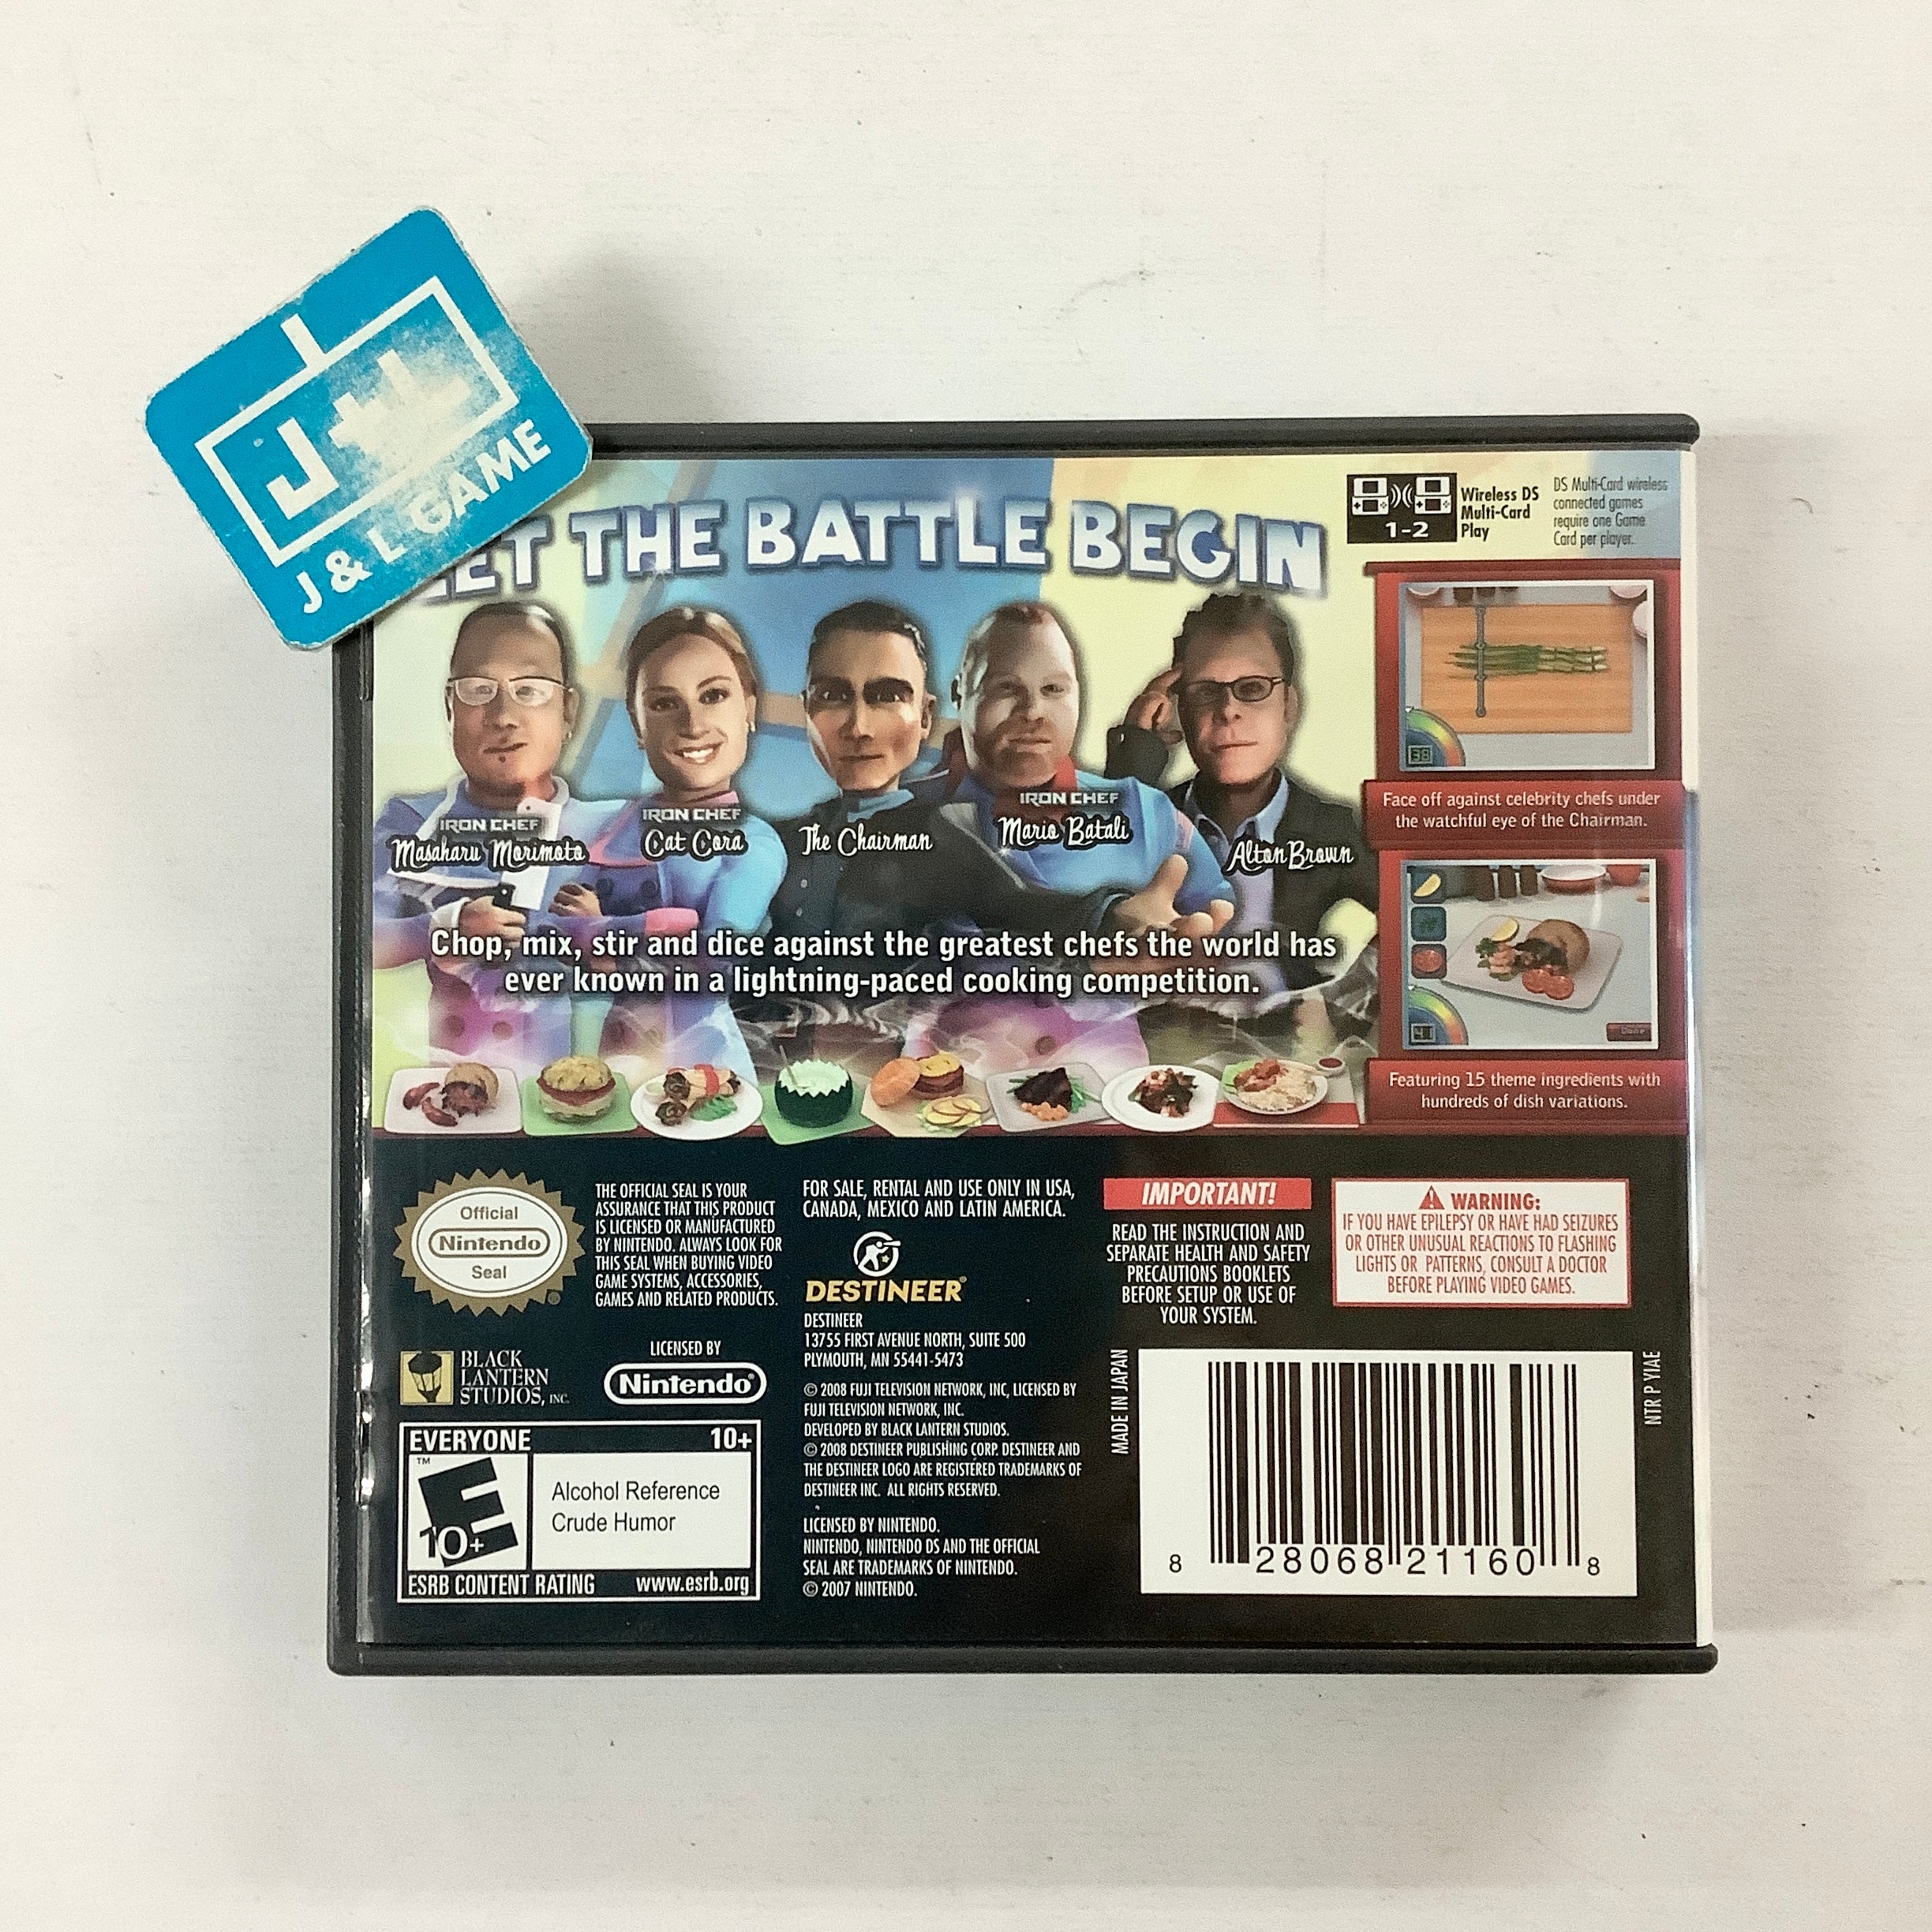 Iron Chef America: Supreme Cuisine - (NDS) Nintendo DS [Pre-Owned]